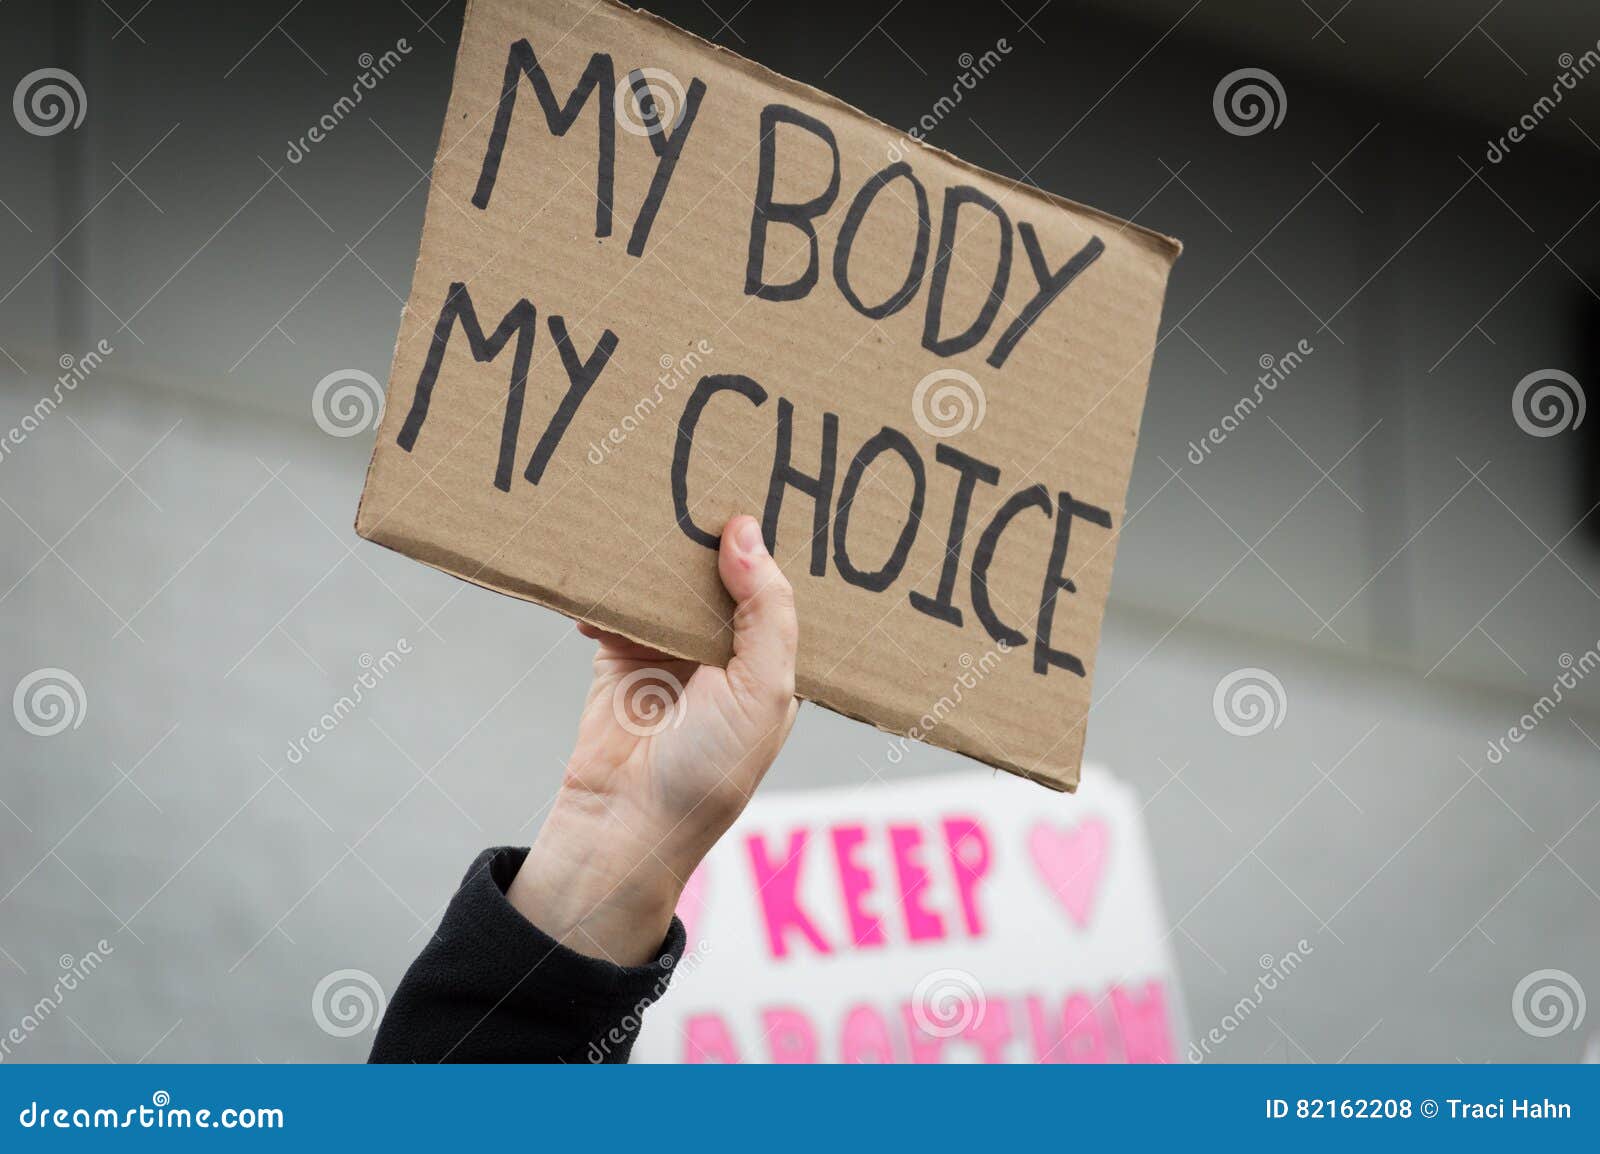 pro choice planned parenthood demonstration holding sign